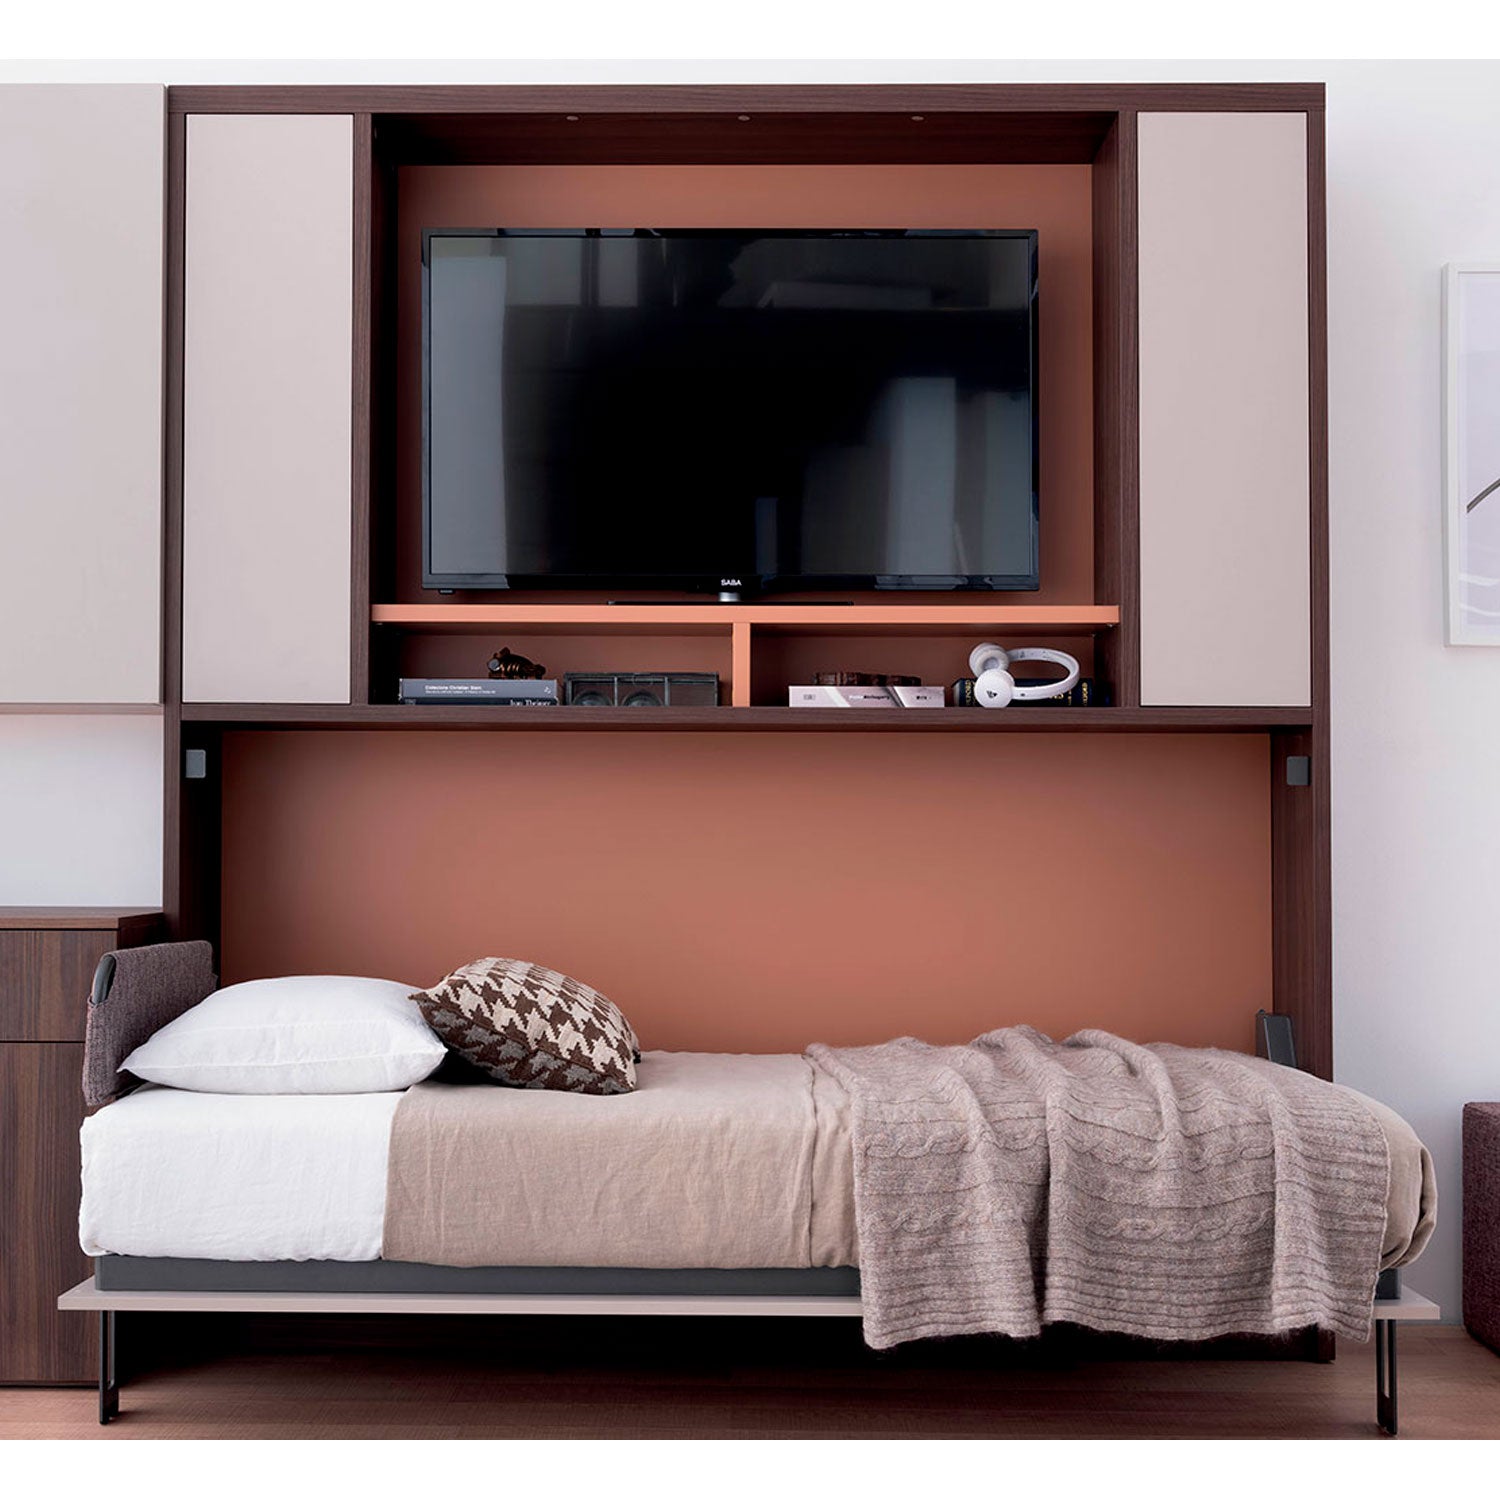 IM20-15 Foldaway Bed by Clever